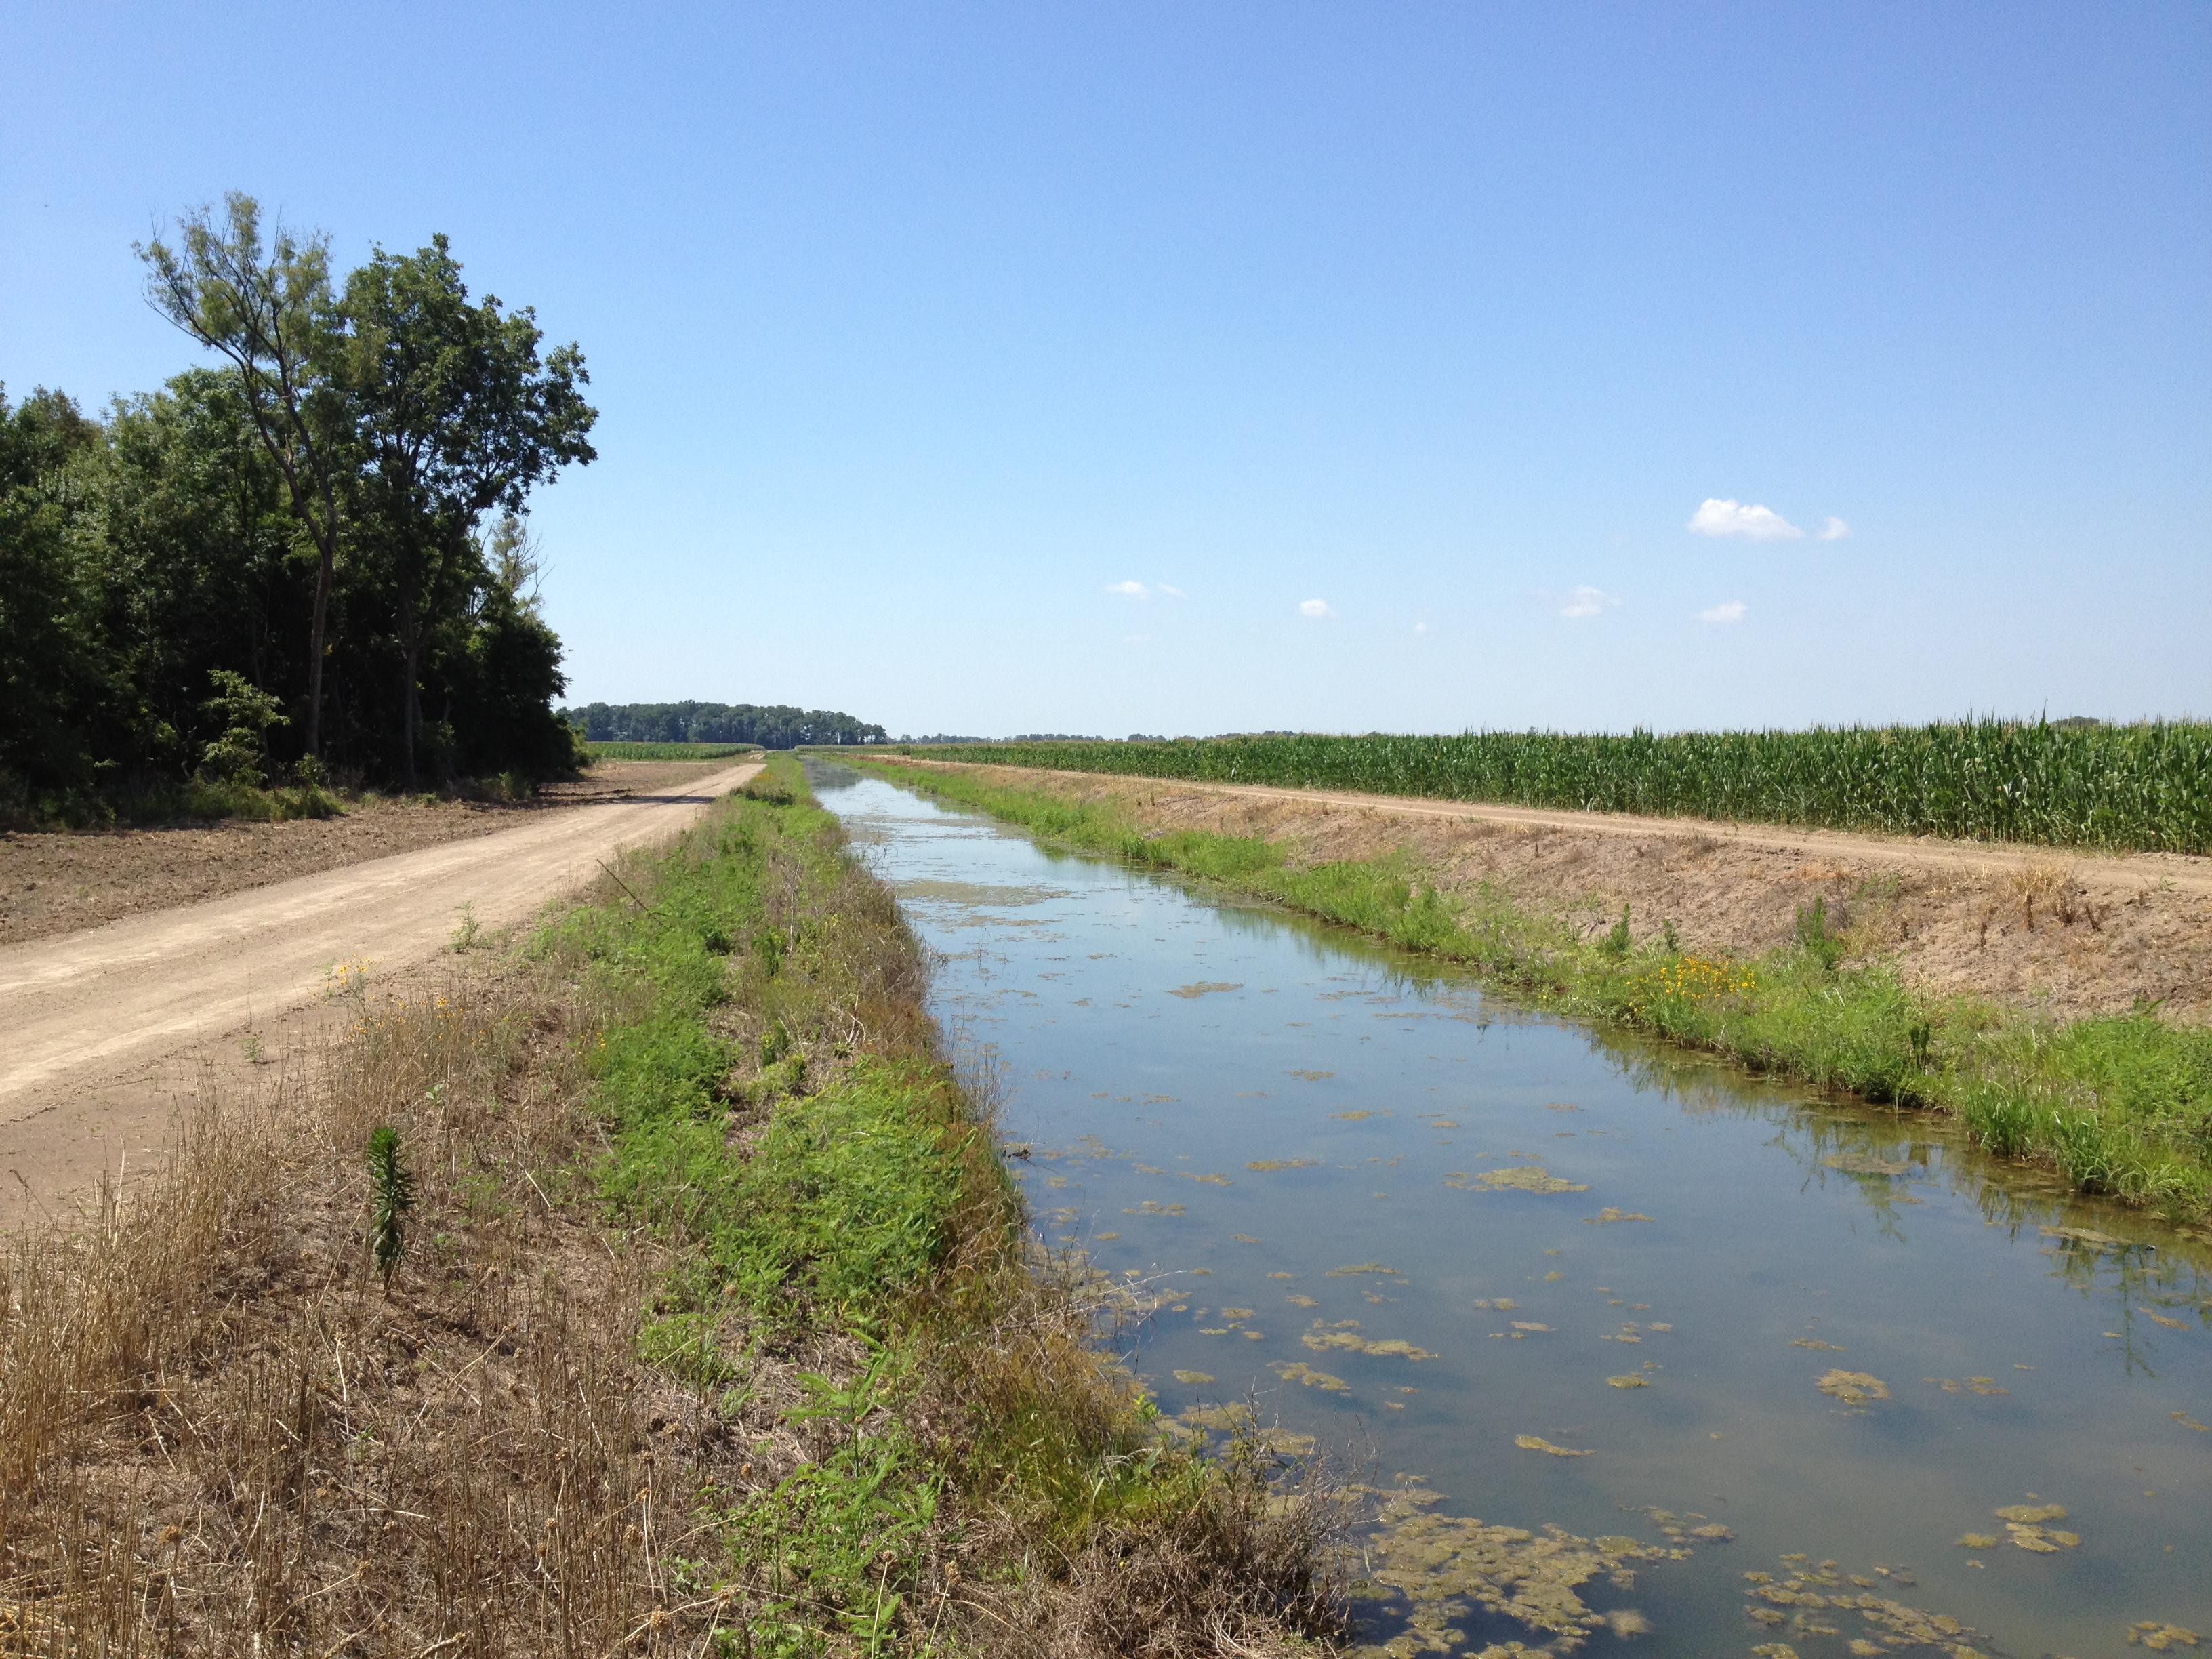 Large water-filled ditch rests between a dirt road and a field of green corn stalks.